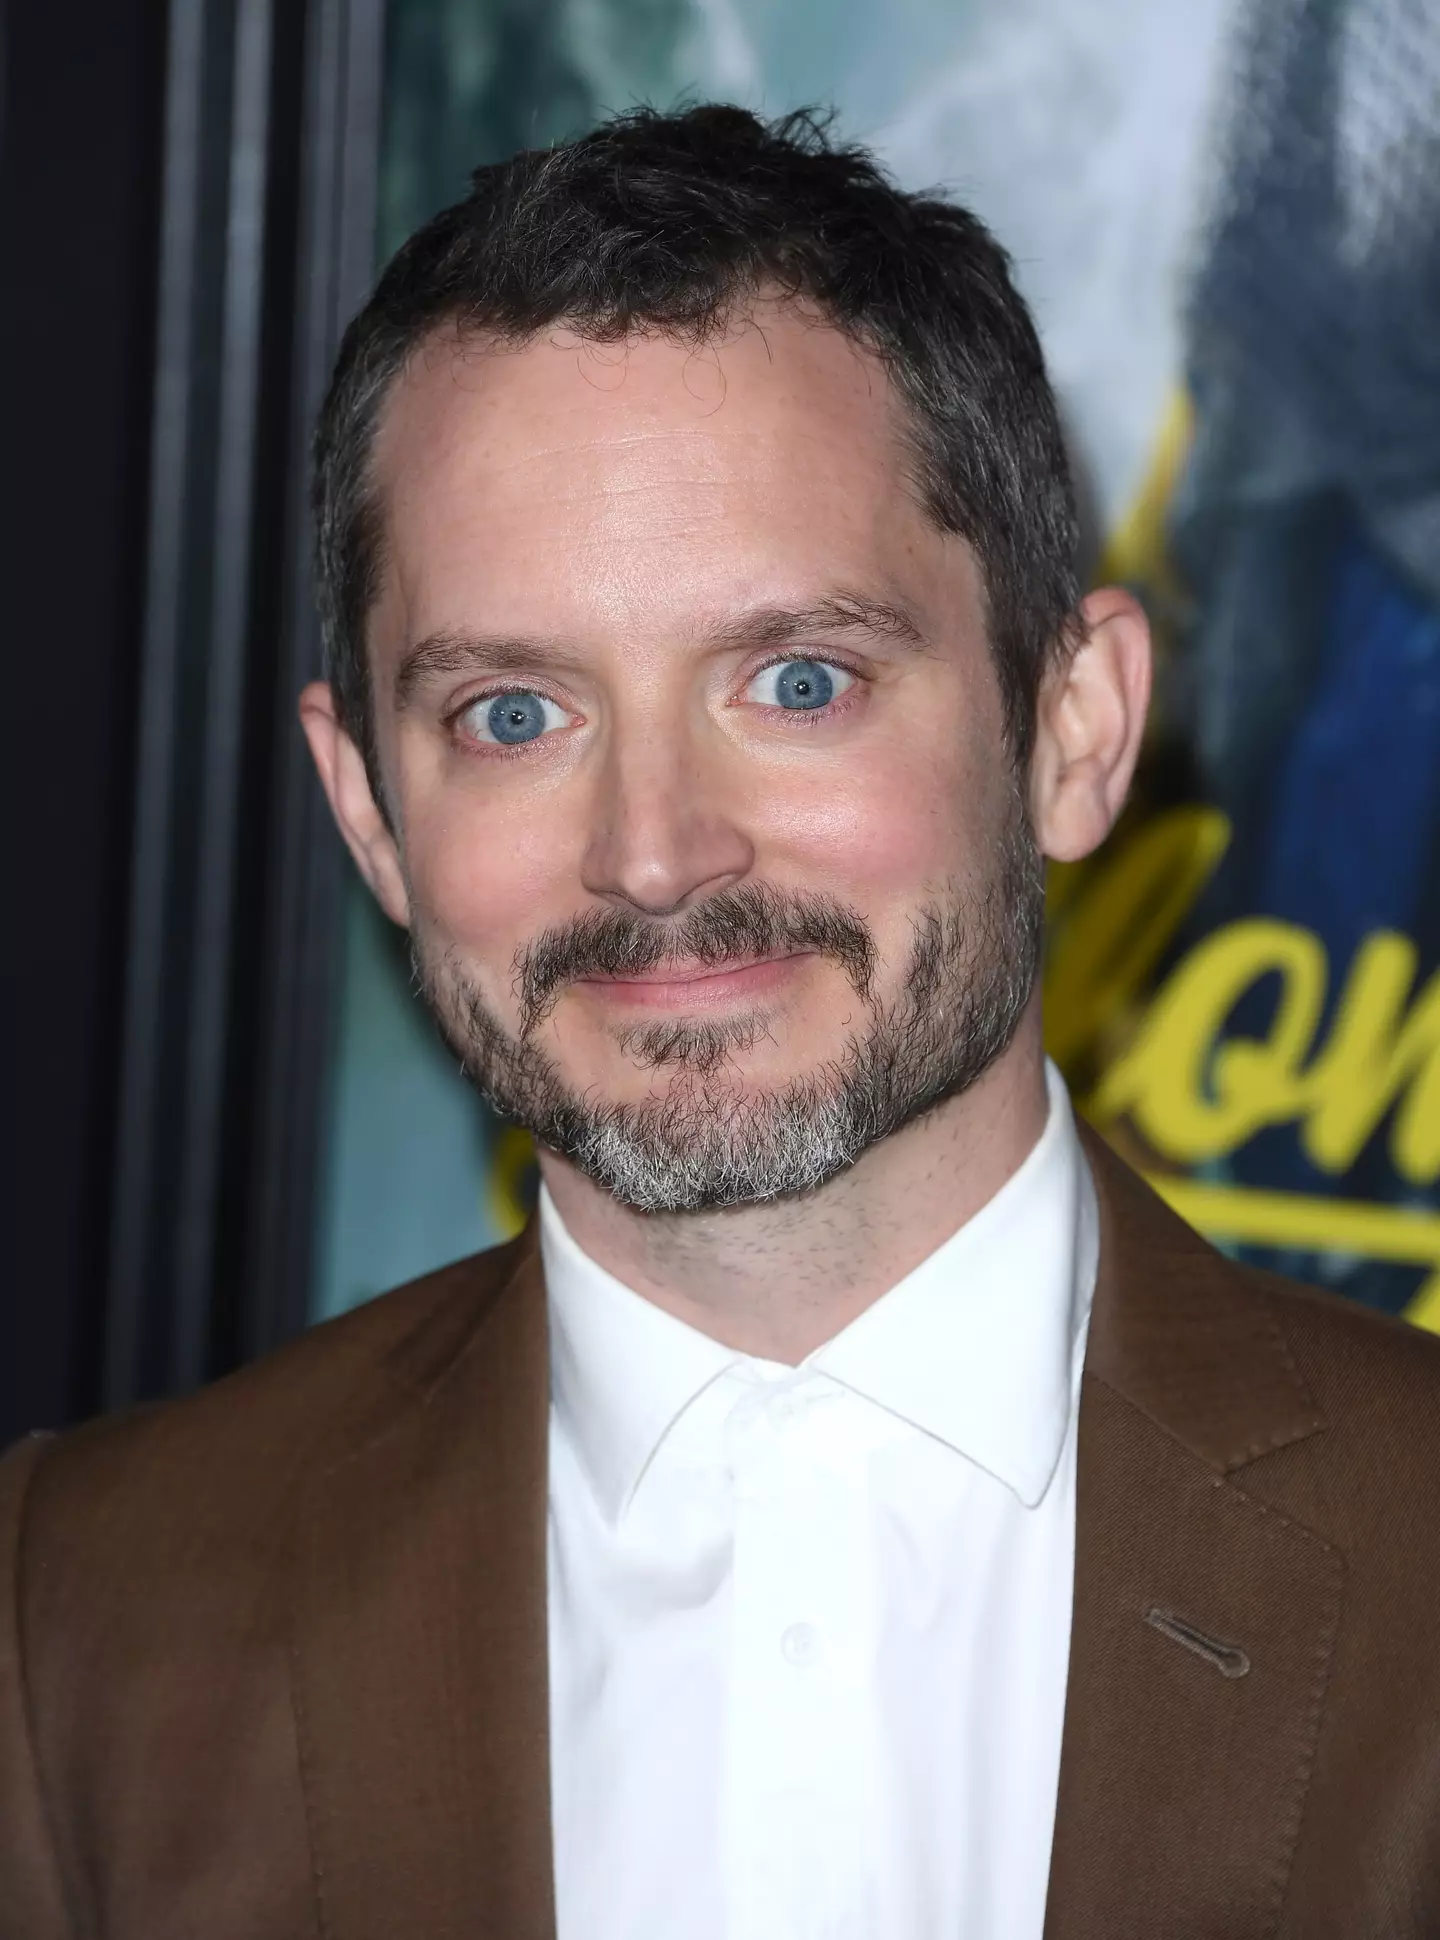 Elijah Wood is set to star in the reboot of The Toxic Avenger.